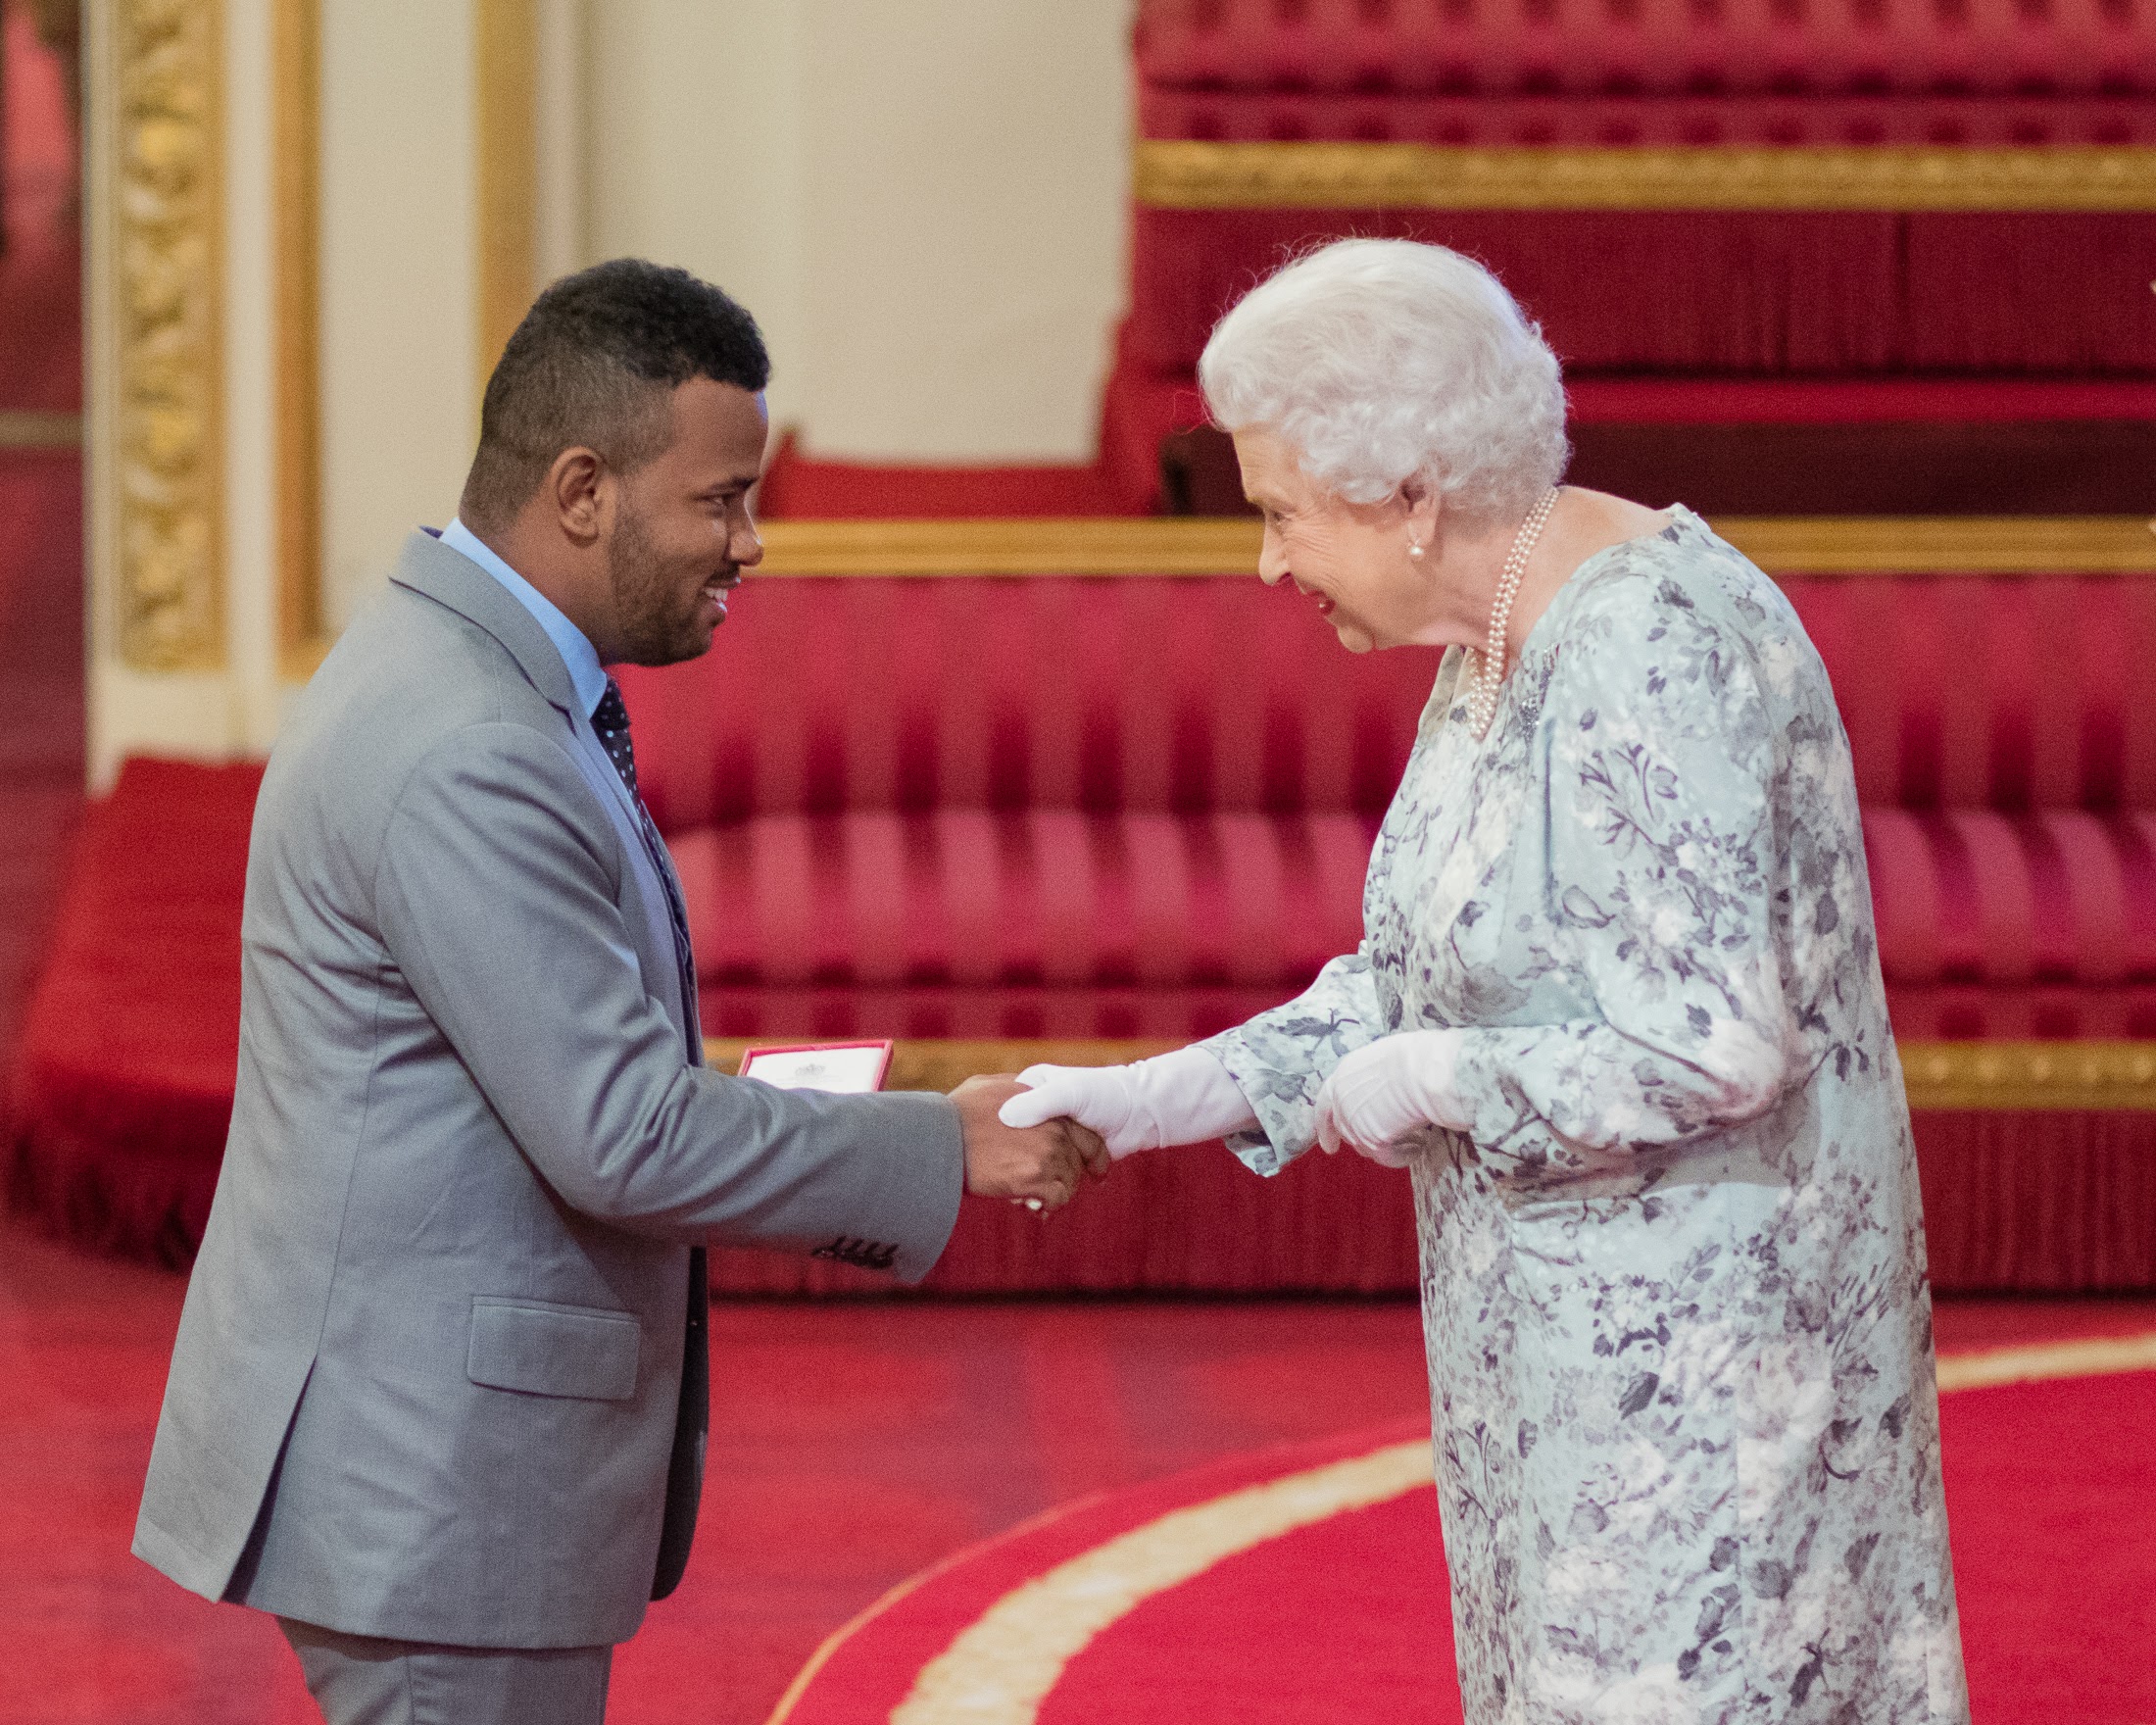 The 2017 Queen's Young Leaders receive their award from her majesty the Queen at Buckingham Palace.